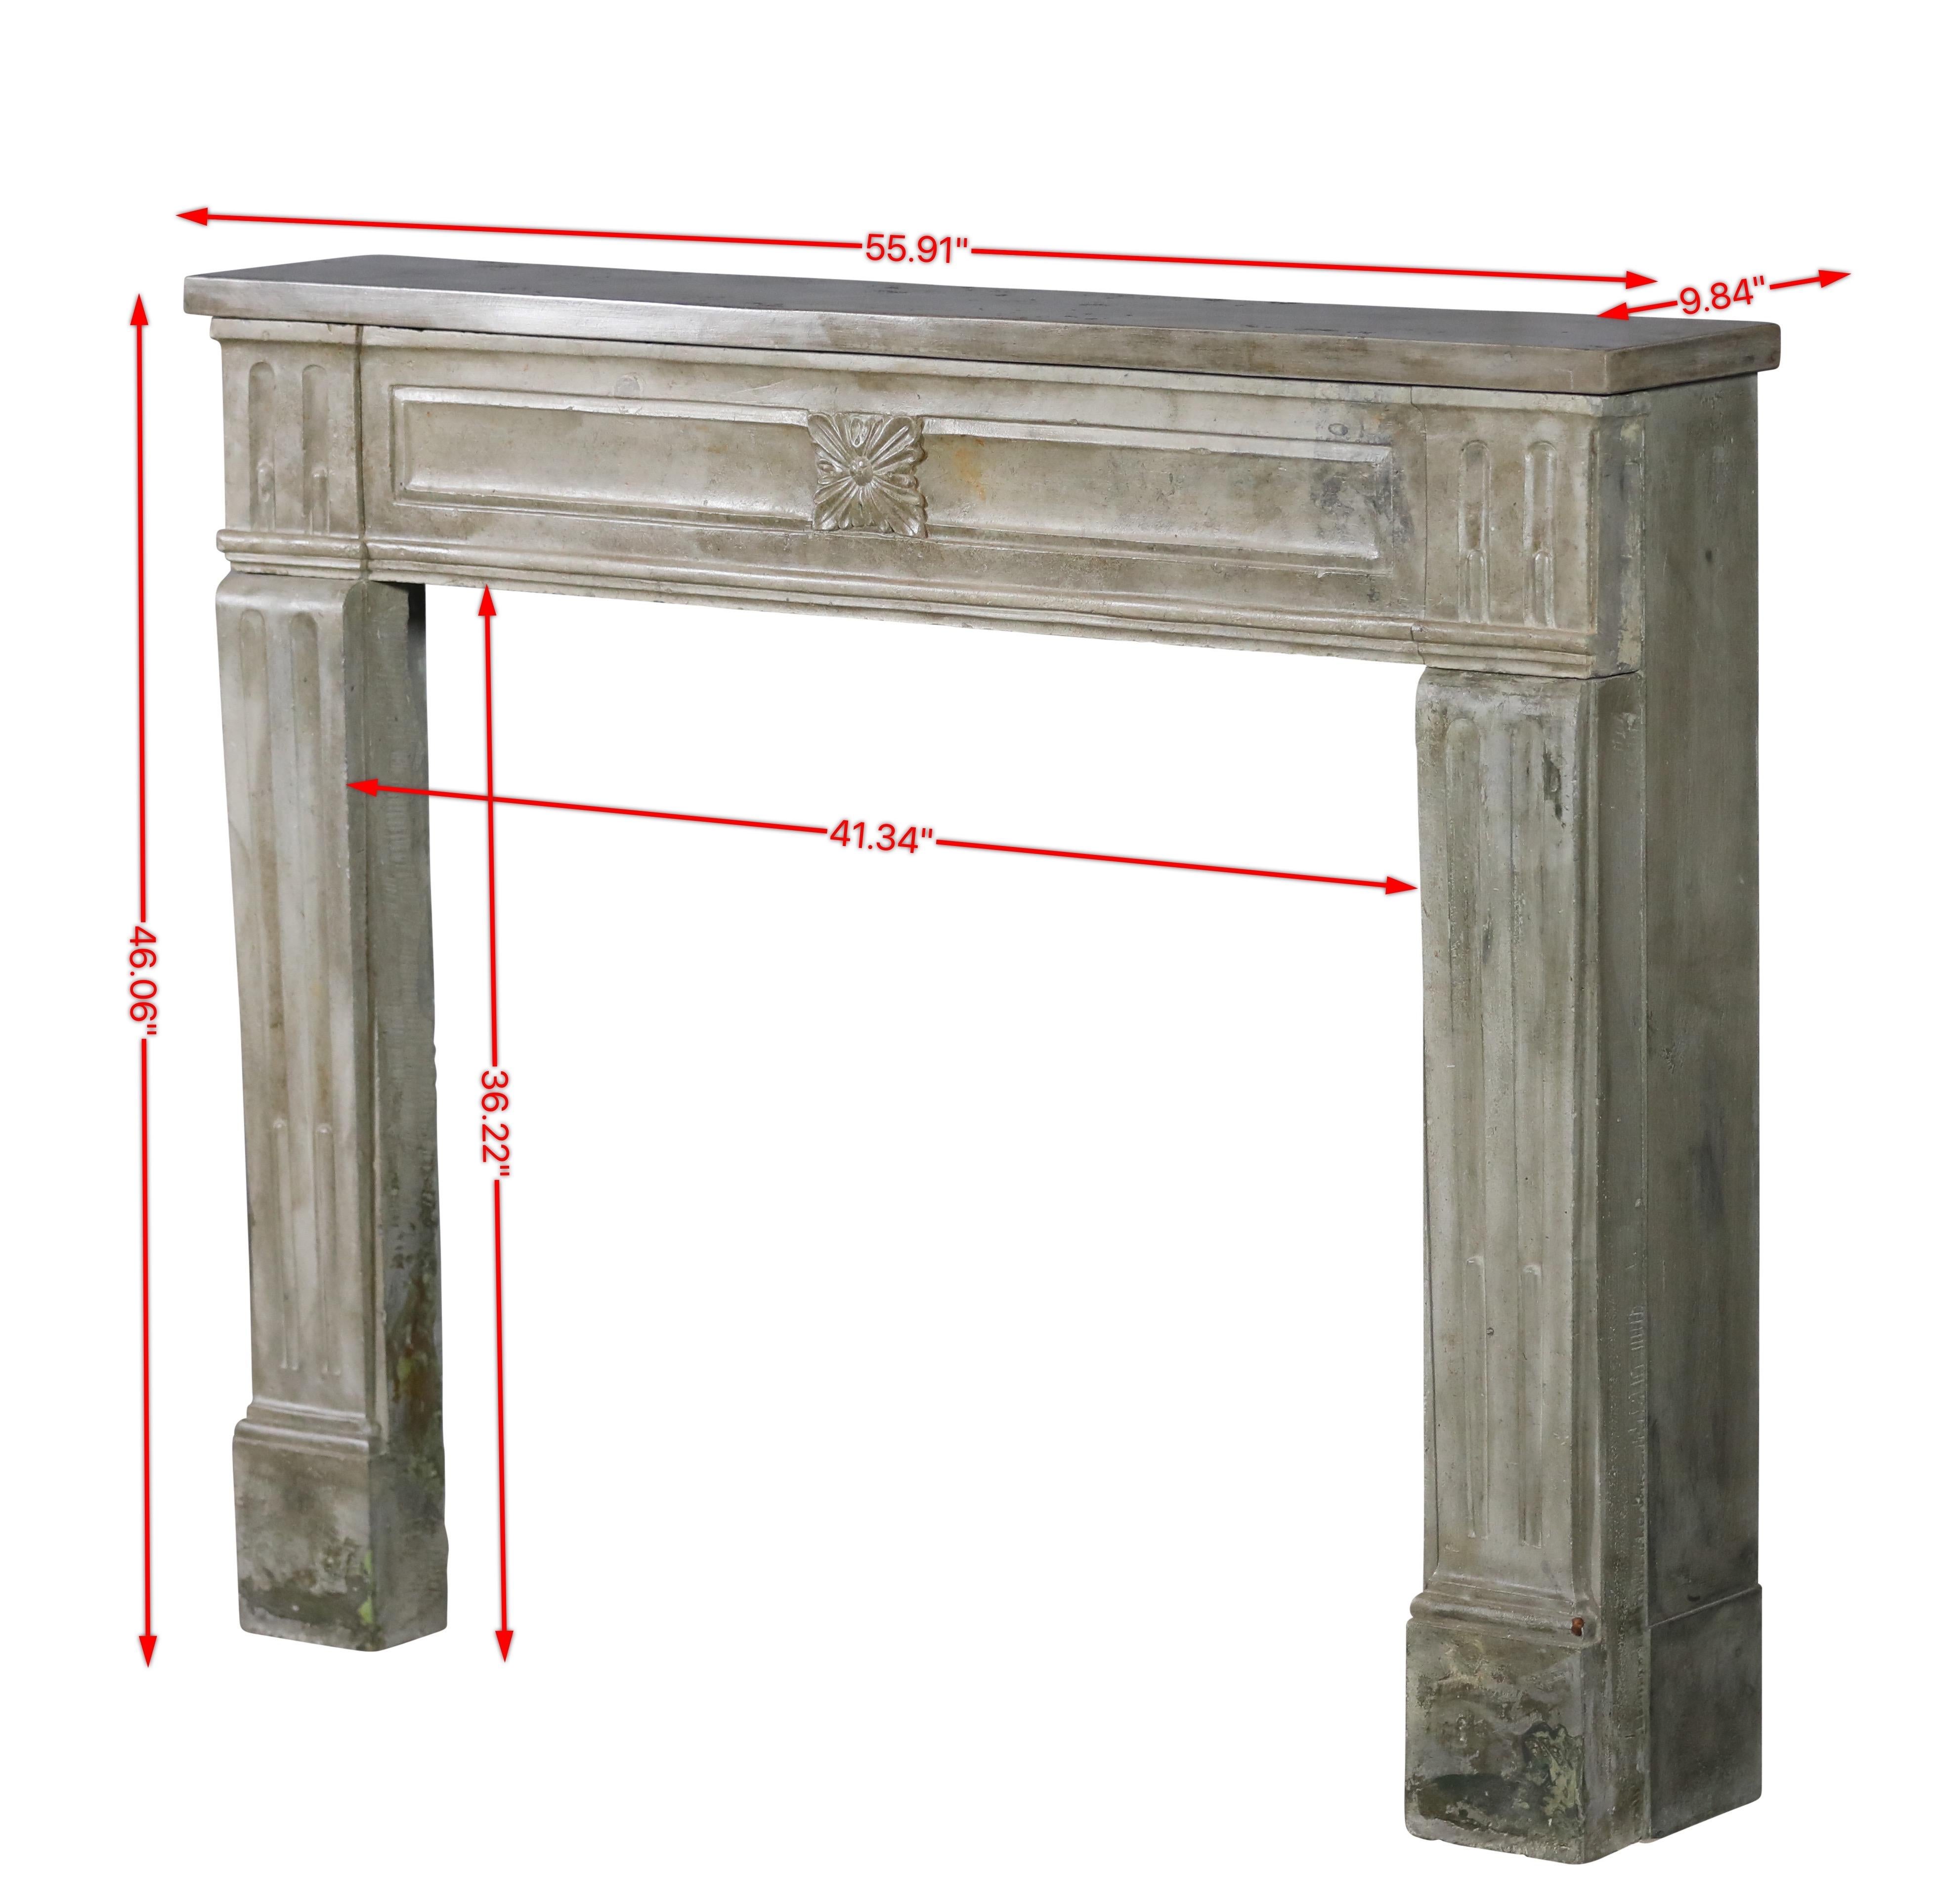 18th Century French classic statement fireplace from Paris.
The limestone has the original colour.
Louis XVI style for timeless high-end interior design creation.
Measurements:
142 cm Exterior Width 55,91 Inch
117 cm Exterior Height 46,06 Inch
105